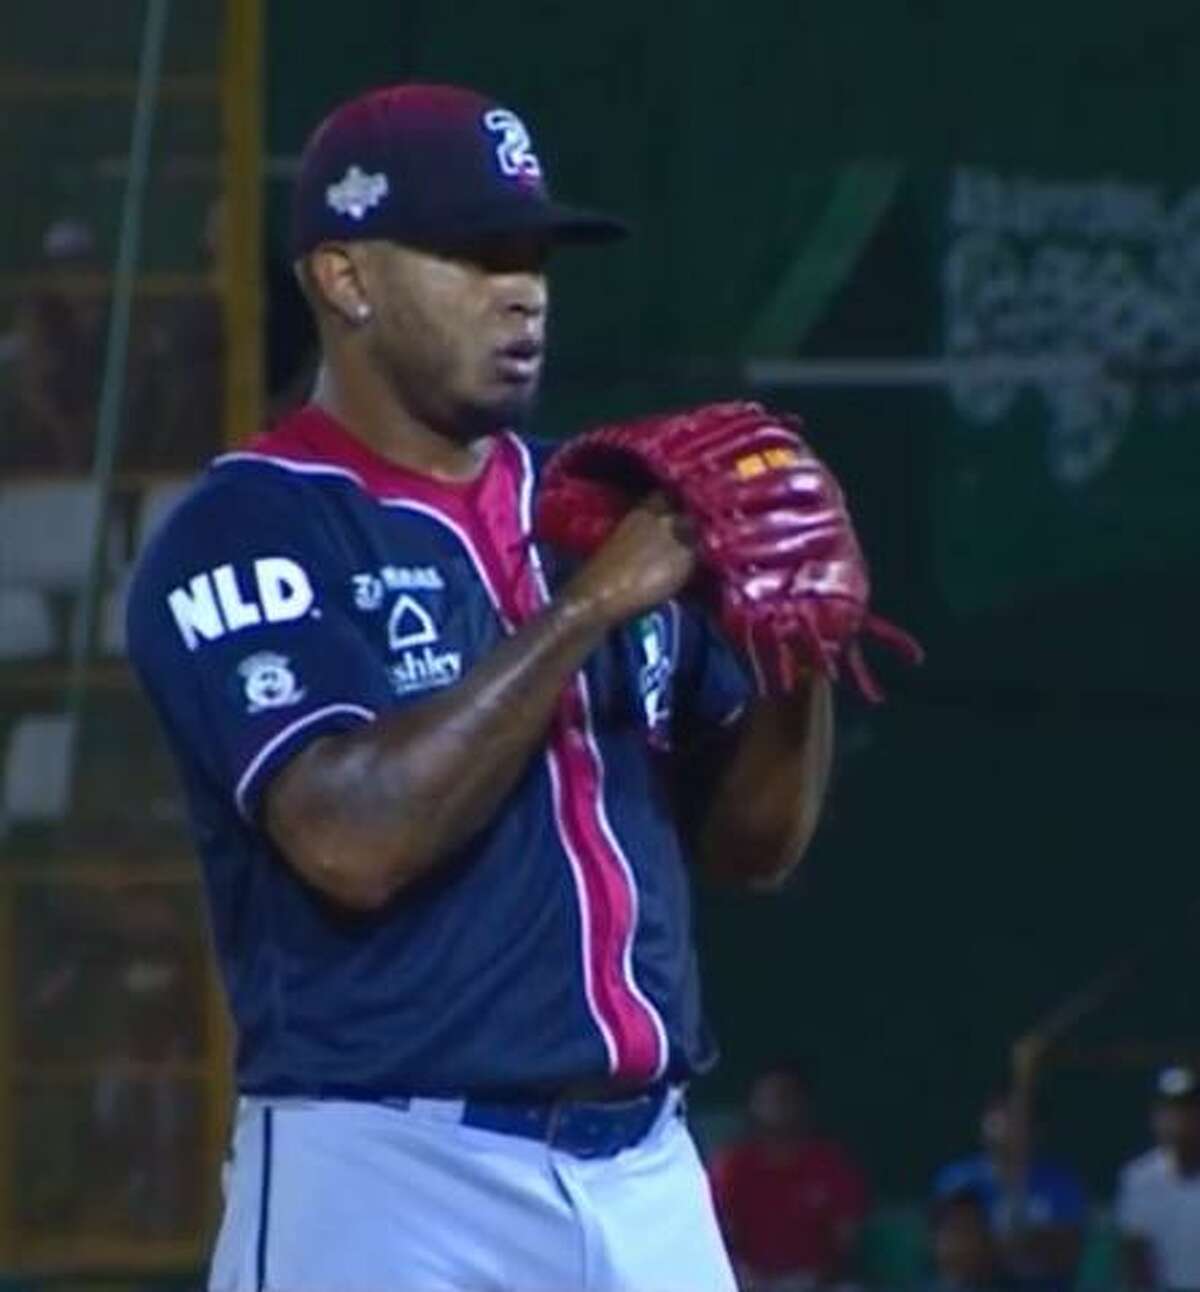 Pitcher Nestor Molina threw a perfect third inning representing the Tecolotes as part of the 2018 Season 1 LMB All-Star Game. The North division lost 10-2 to the South at Yucatan.